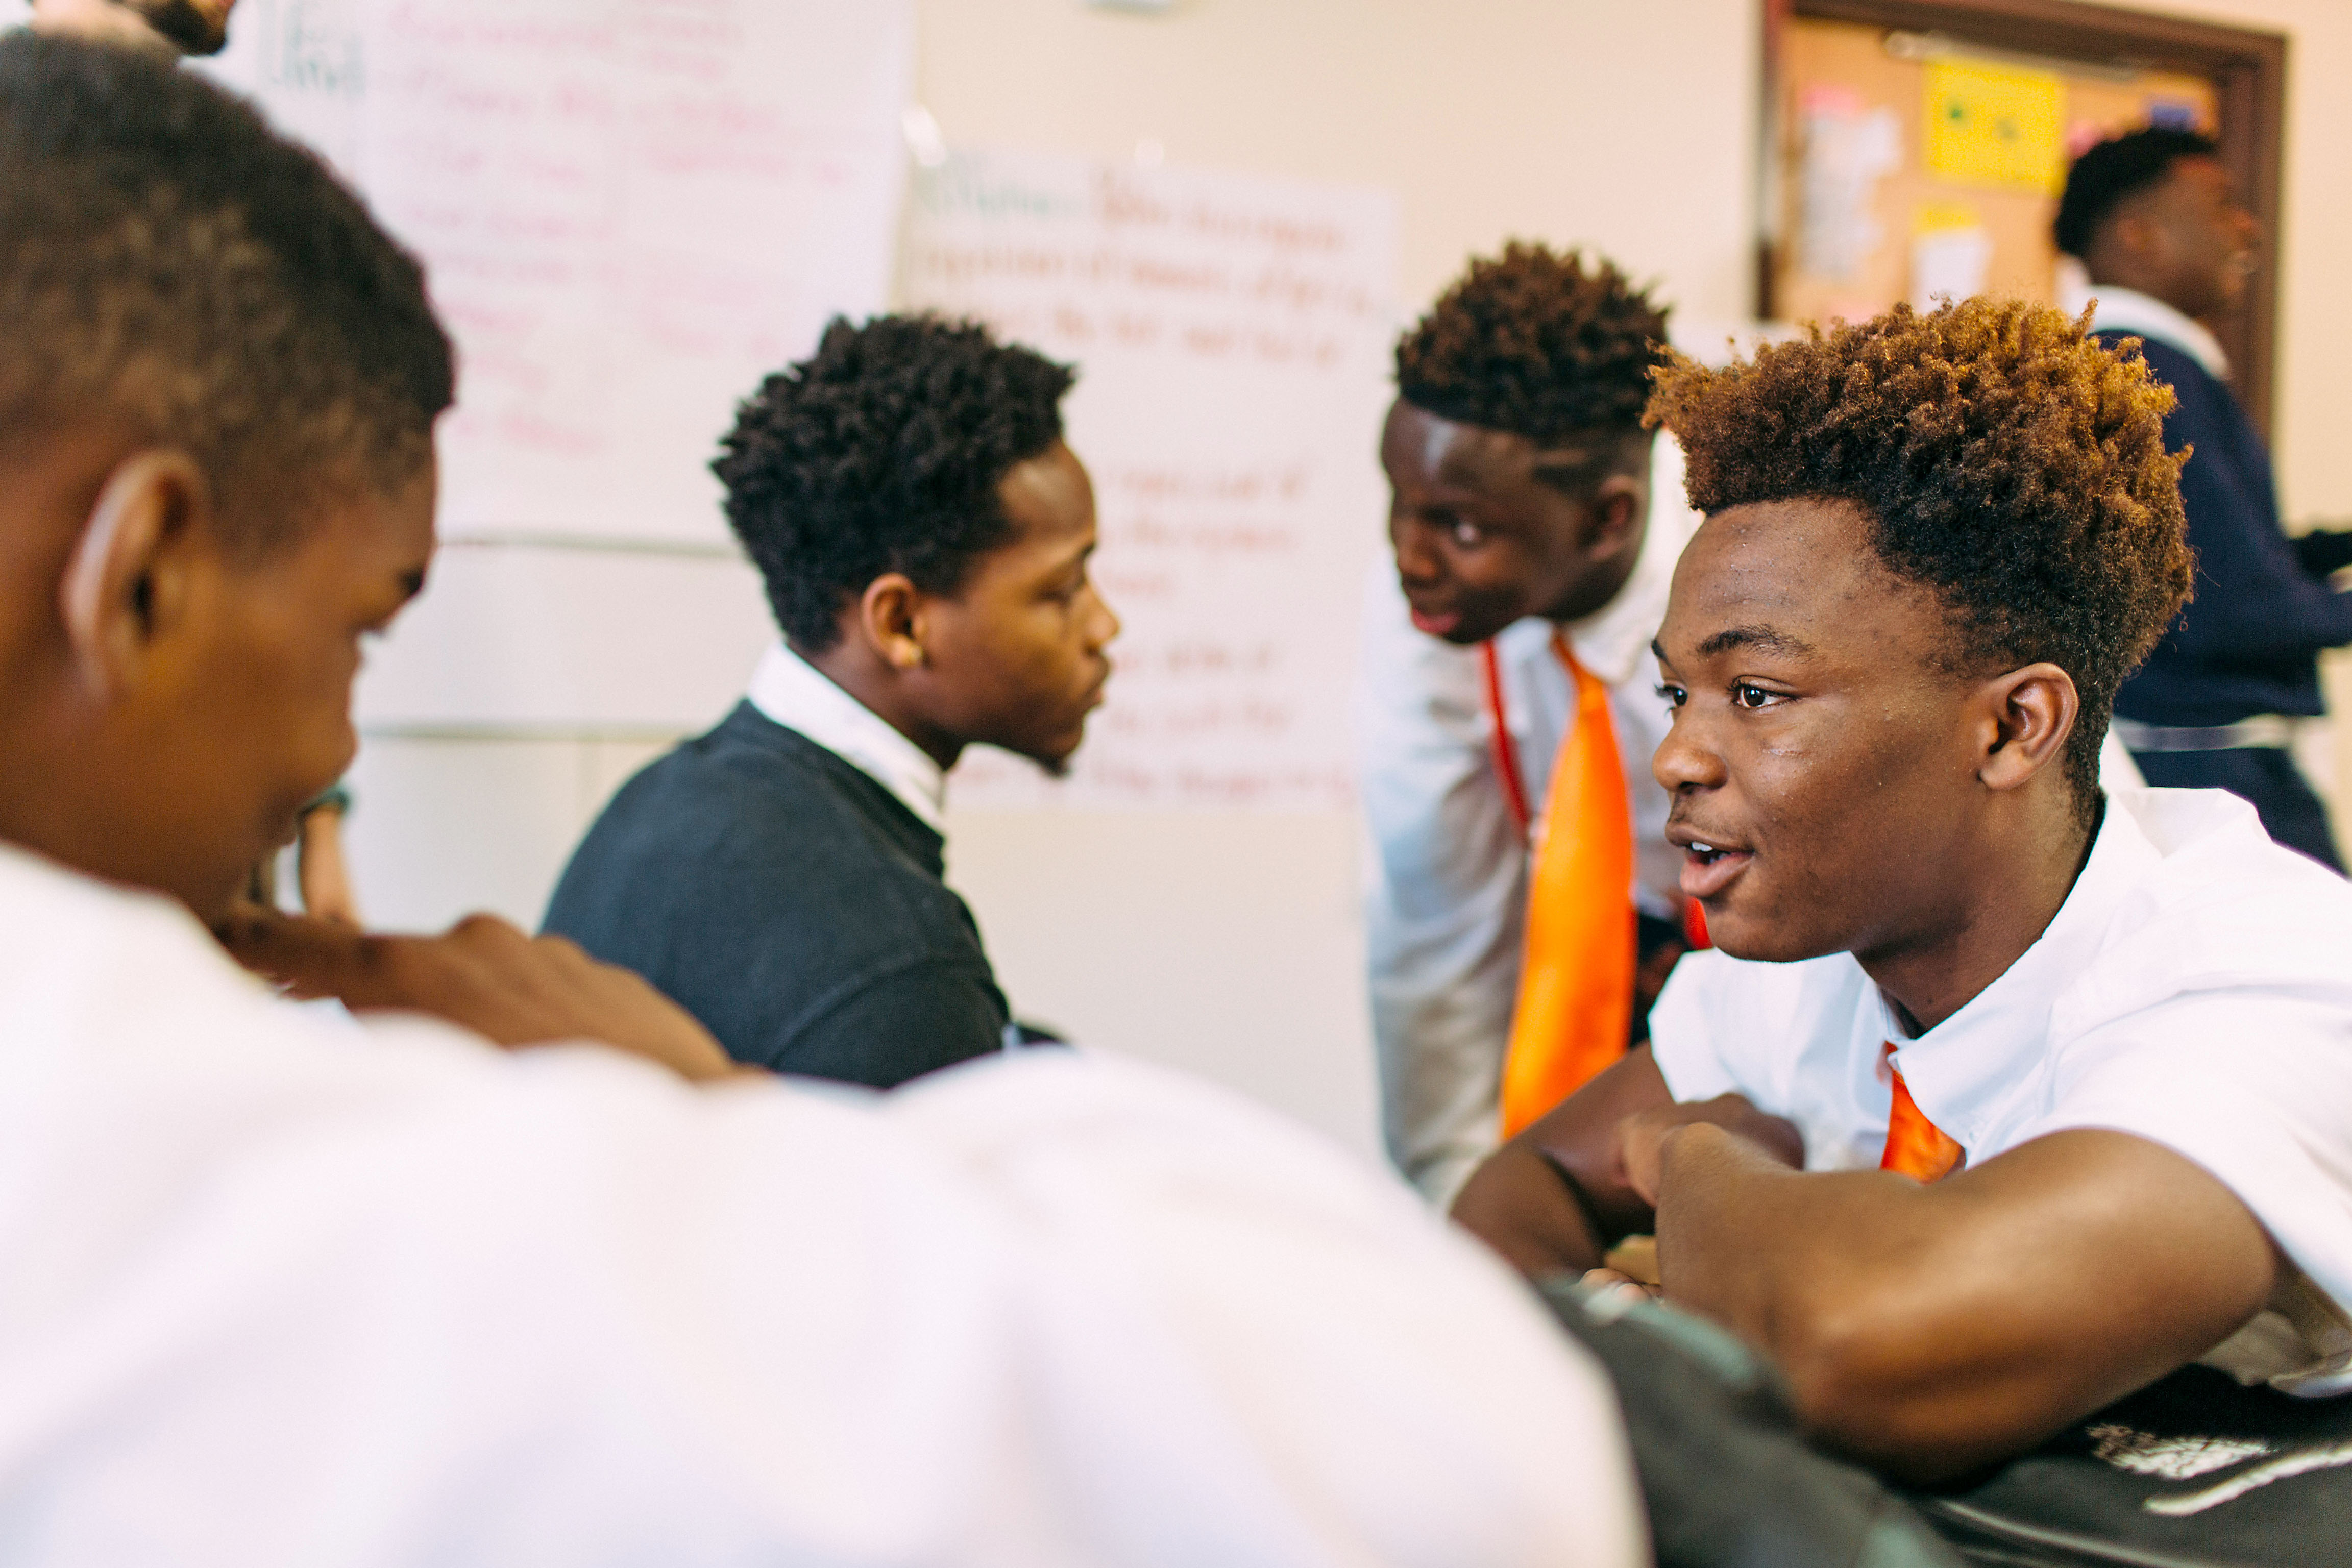 “When they’re not learning in the classroom, THRIVE students take part in several extracurricular activities like sports teams, student council, study groups and even spoken word poetry programs hosted by Forward Arts,” says Broome. Photo by Frank McMains.